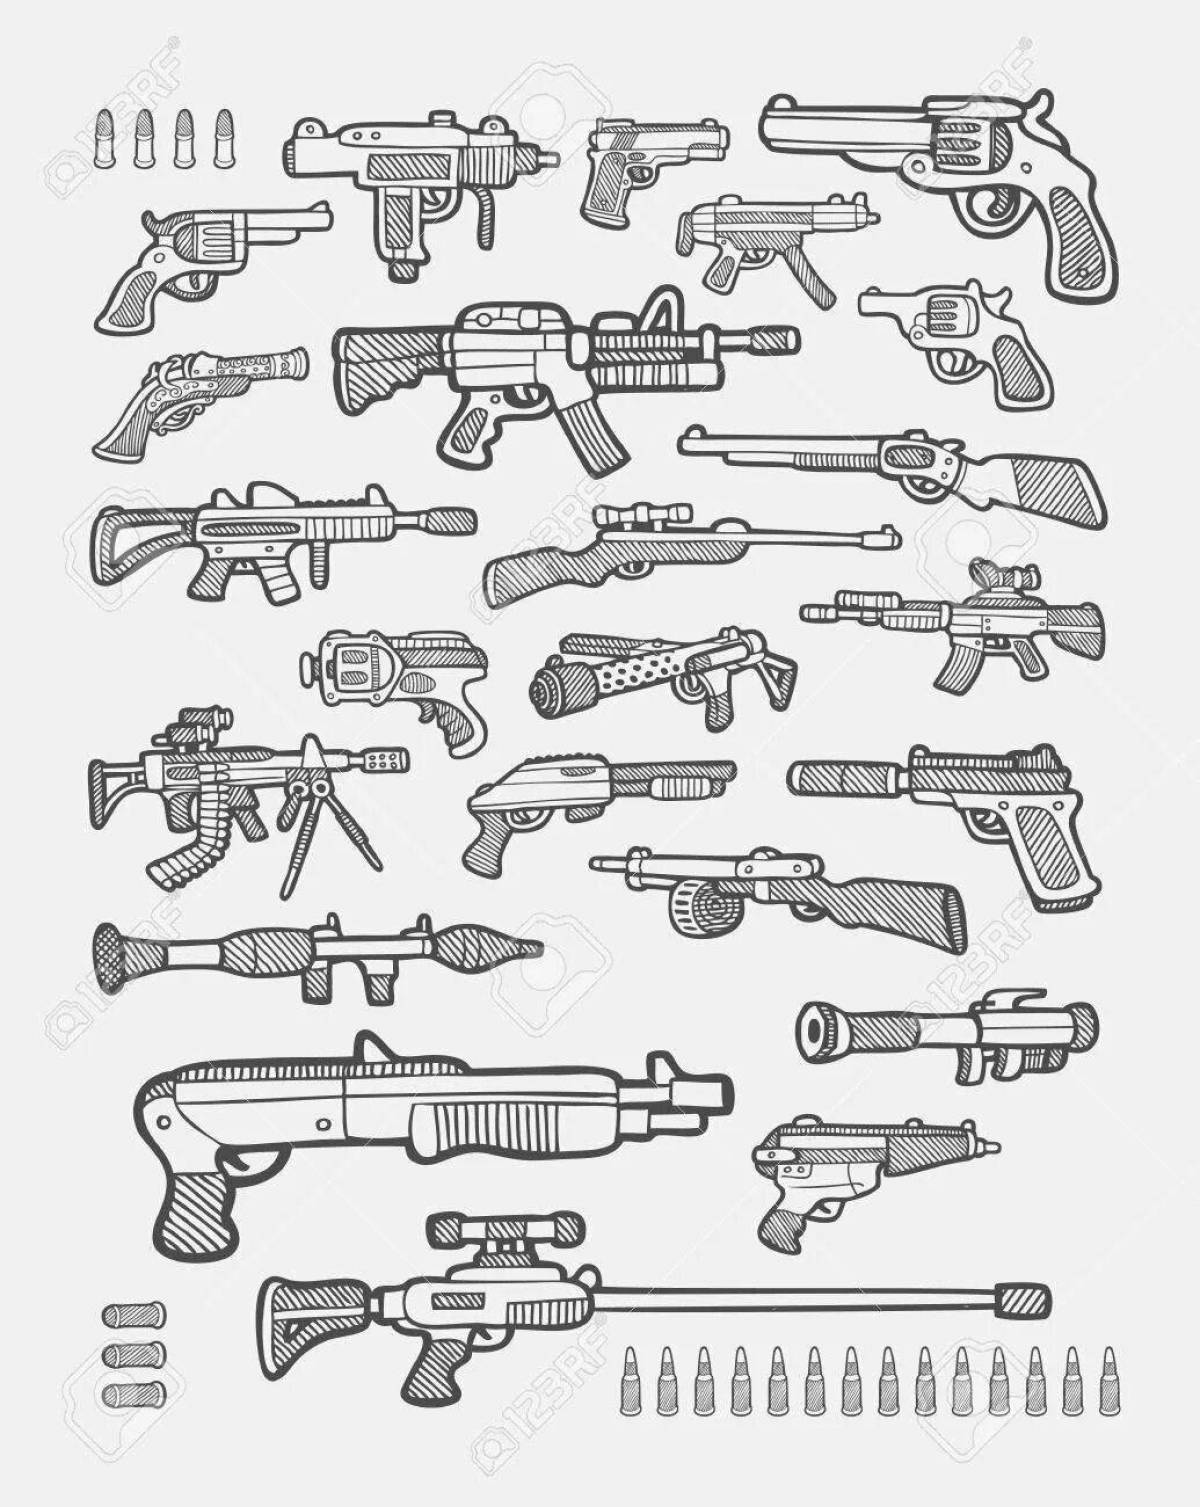 Exquisite firearms coloring page